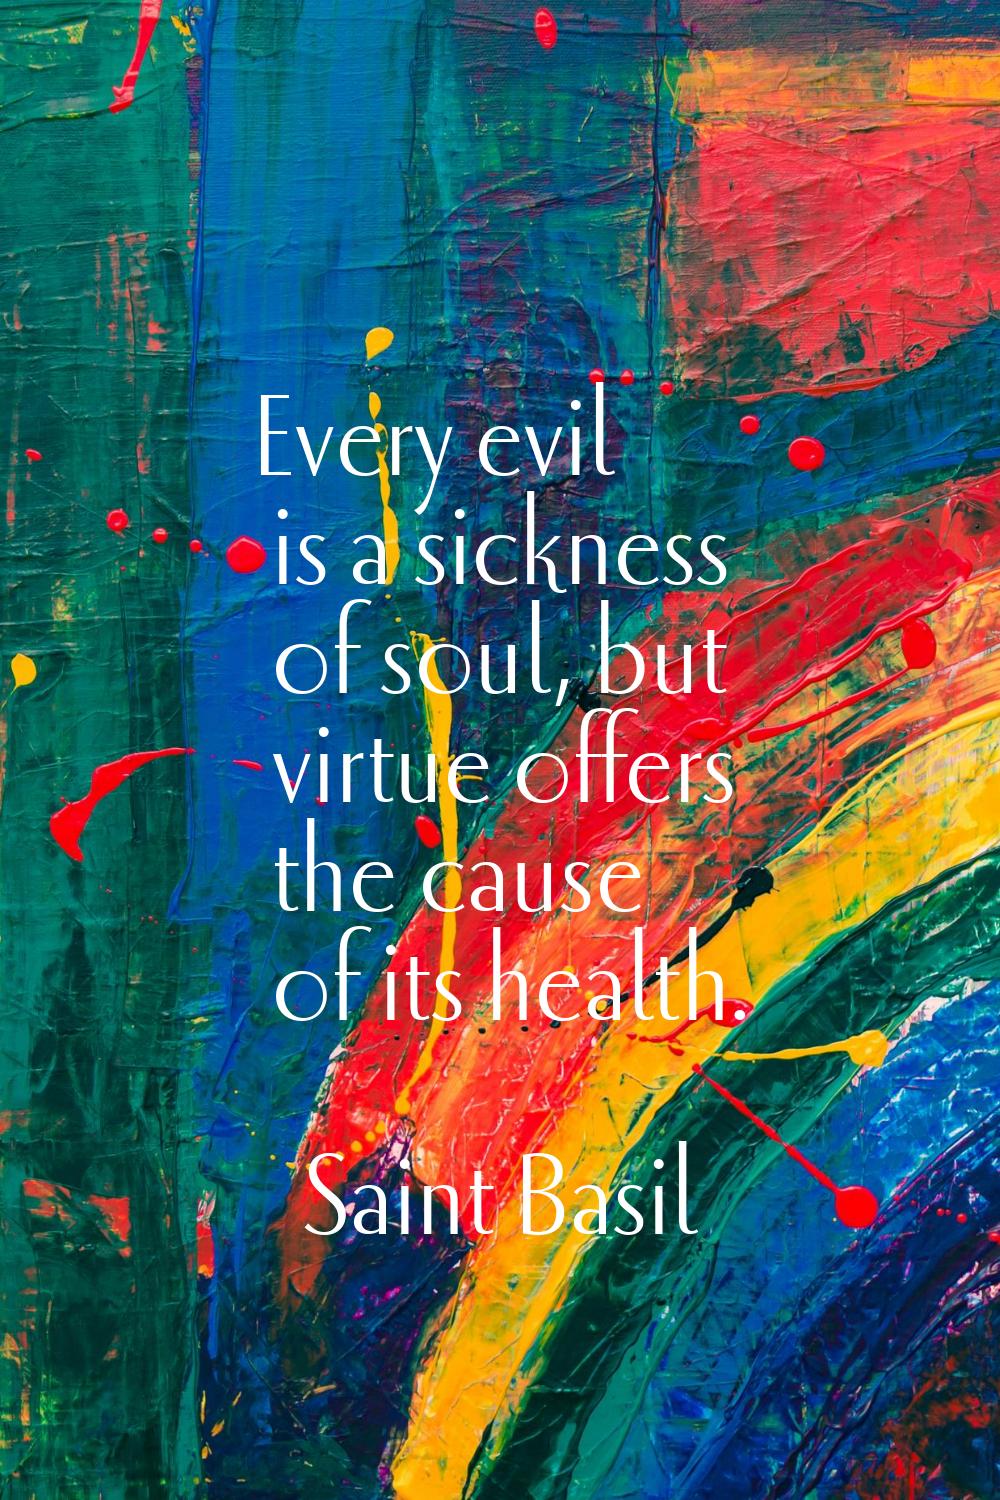 Every evil is a sickness of soul, but virtue offers the cause of its health.